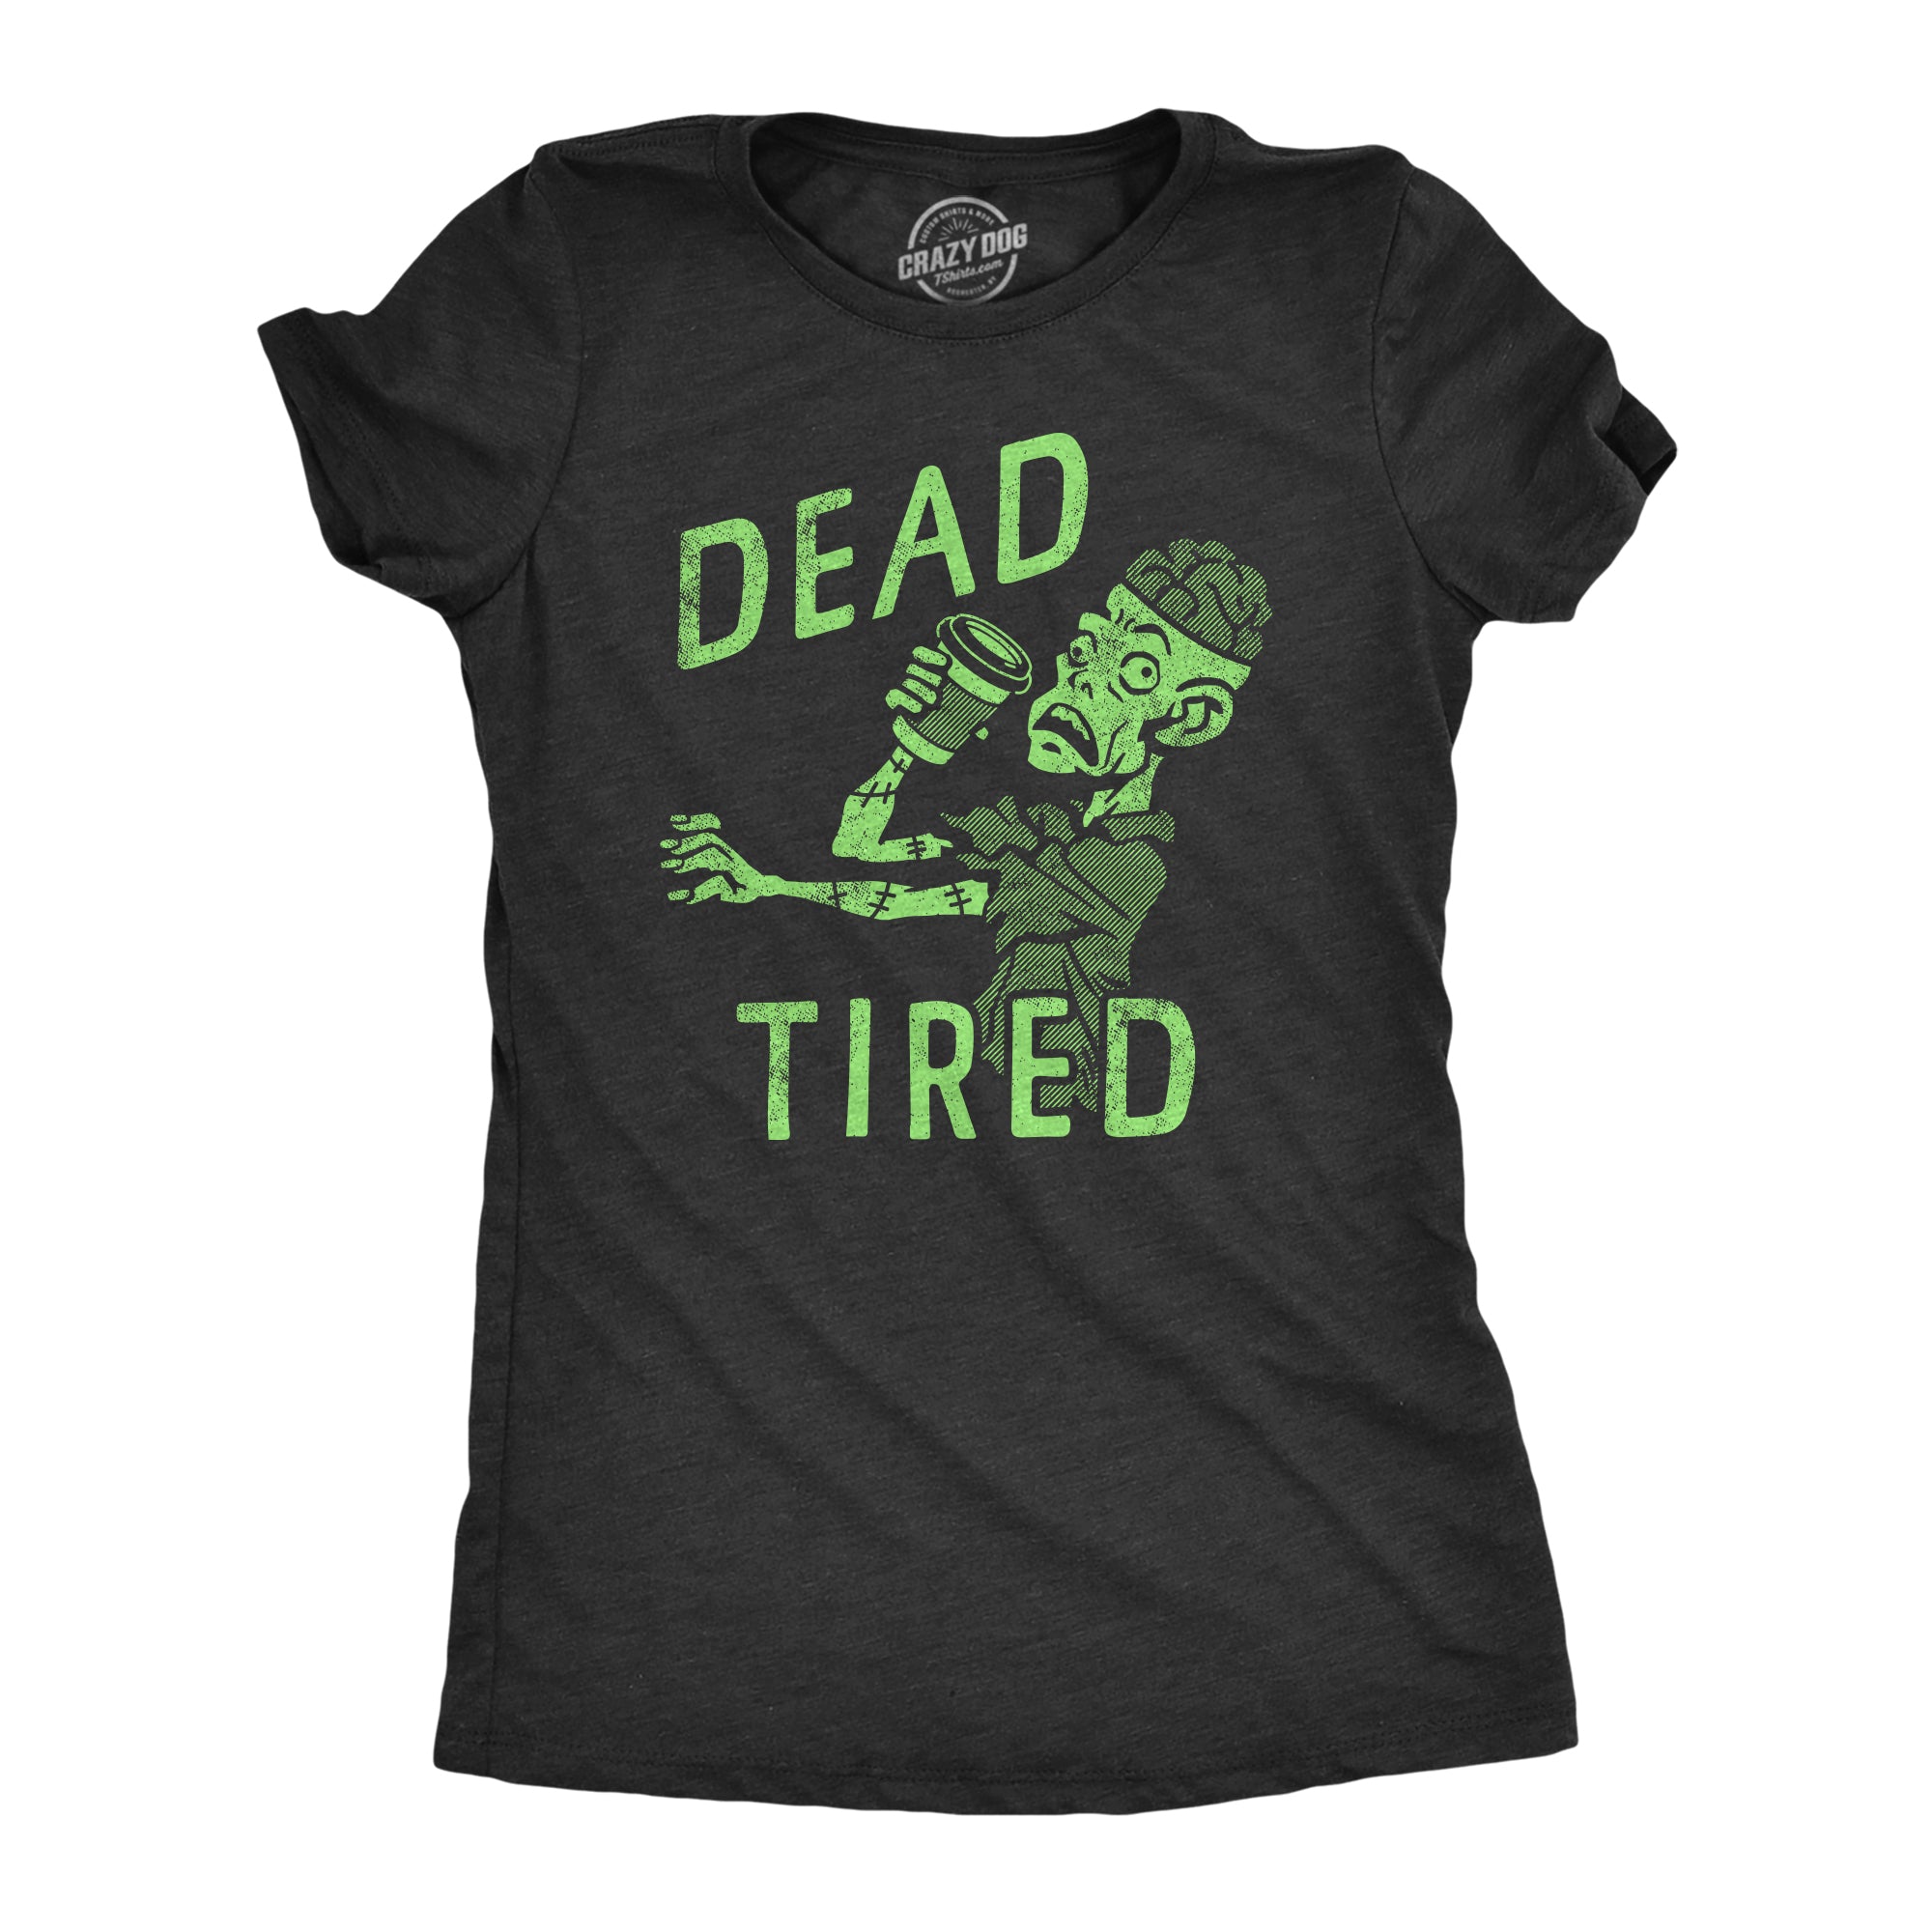 Funny Heather Black - TIRED Dead Tired Womens T Shirt Nerdy Coffee zombie Tee